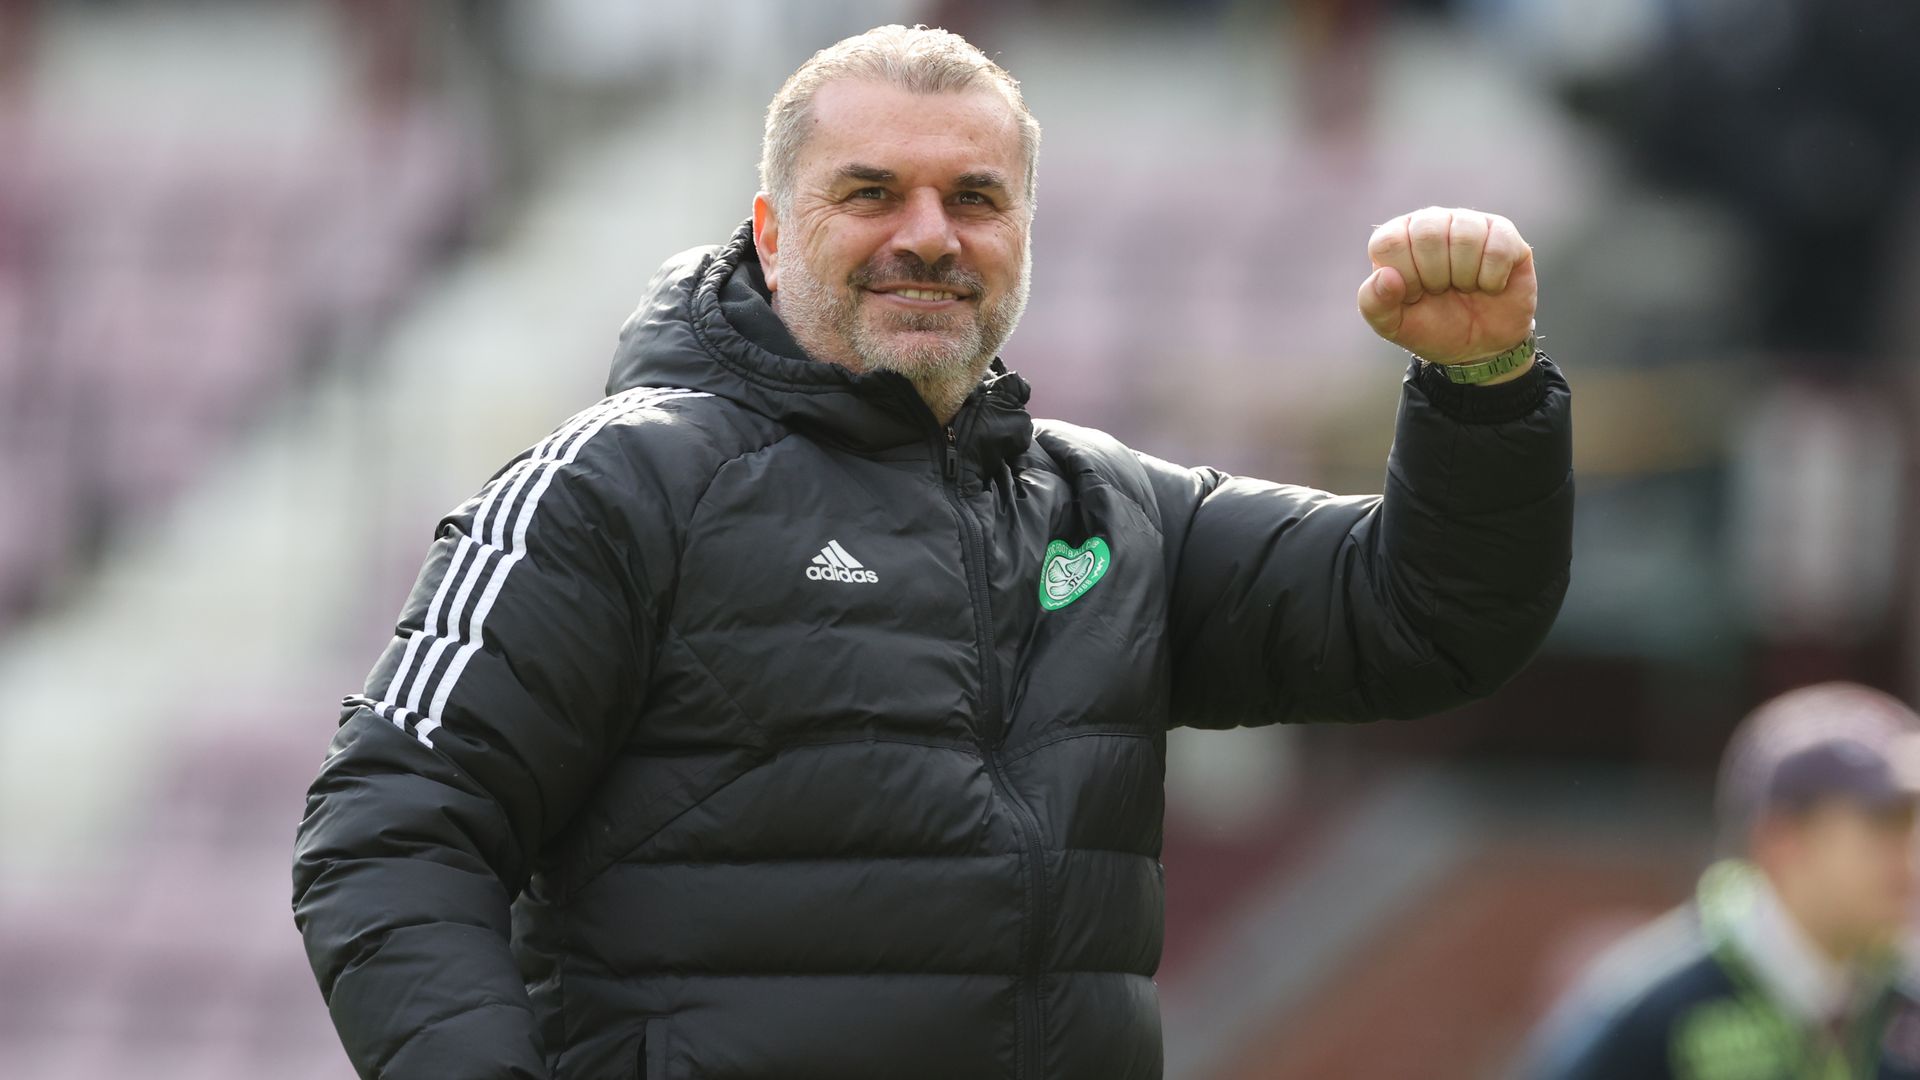 'It's great recognition' | Postecoglou wins PFA Manager of the Year